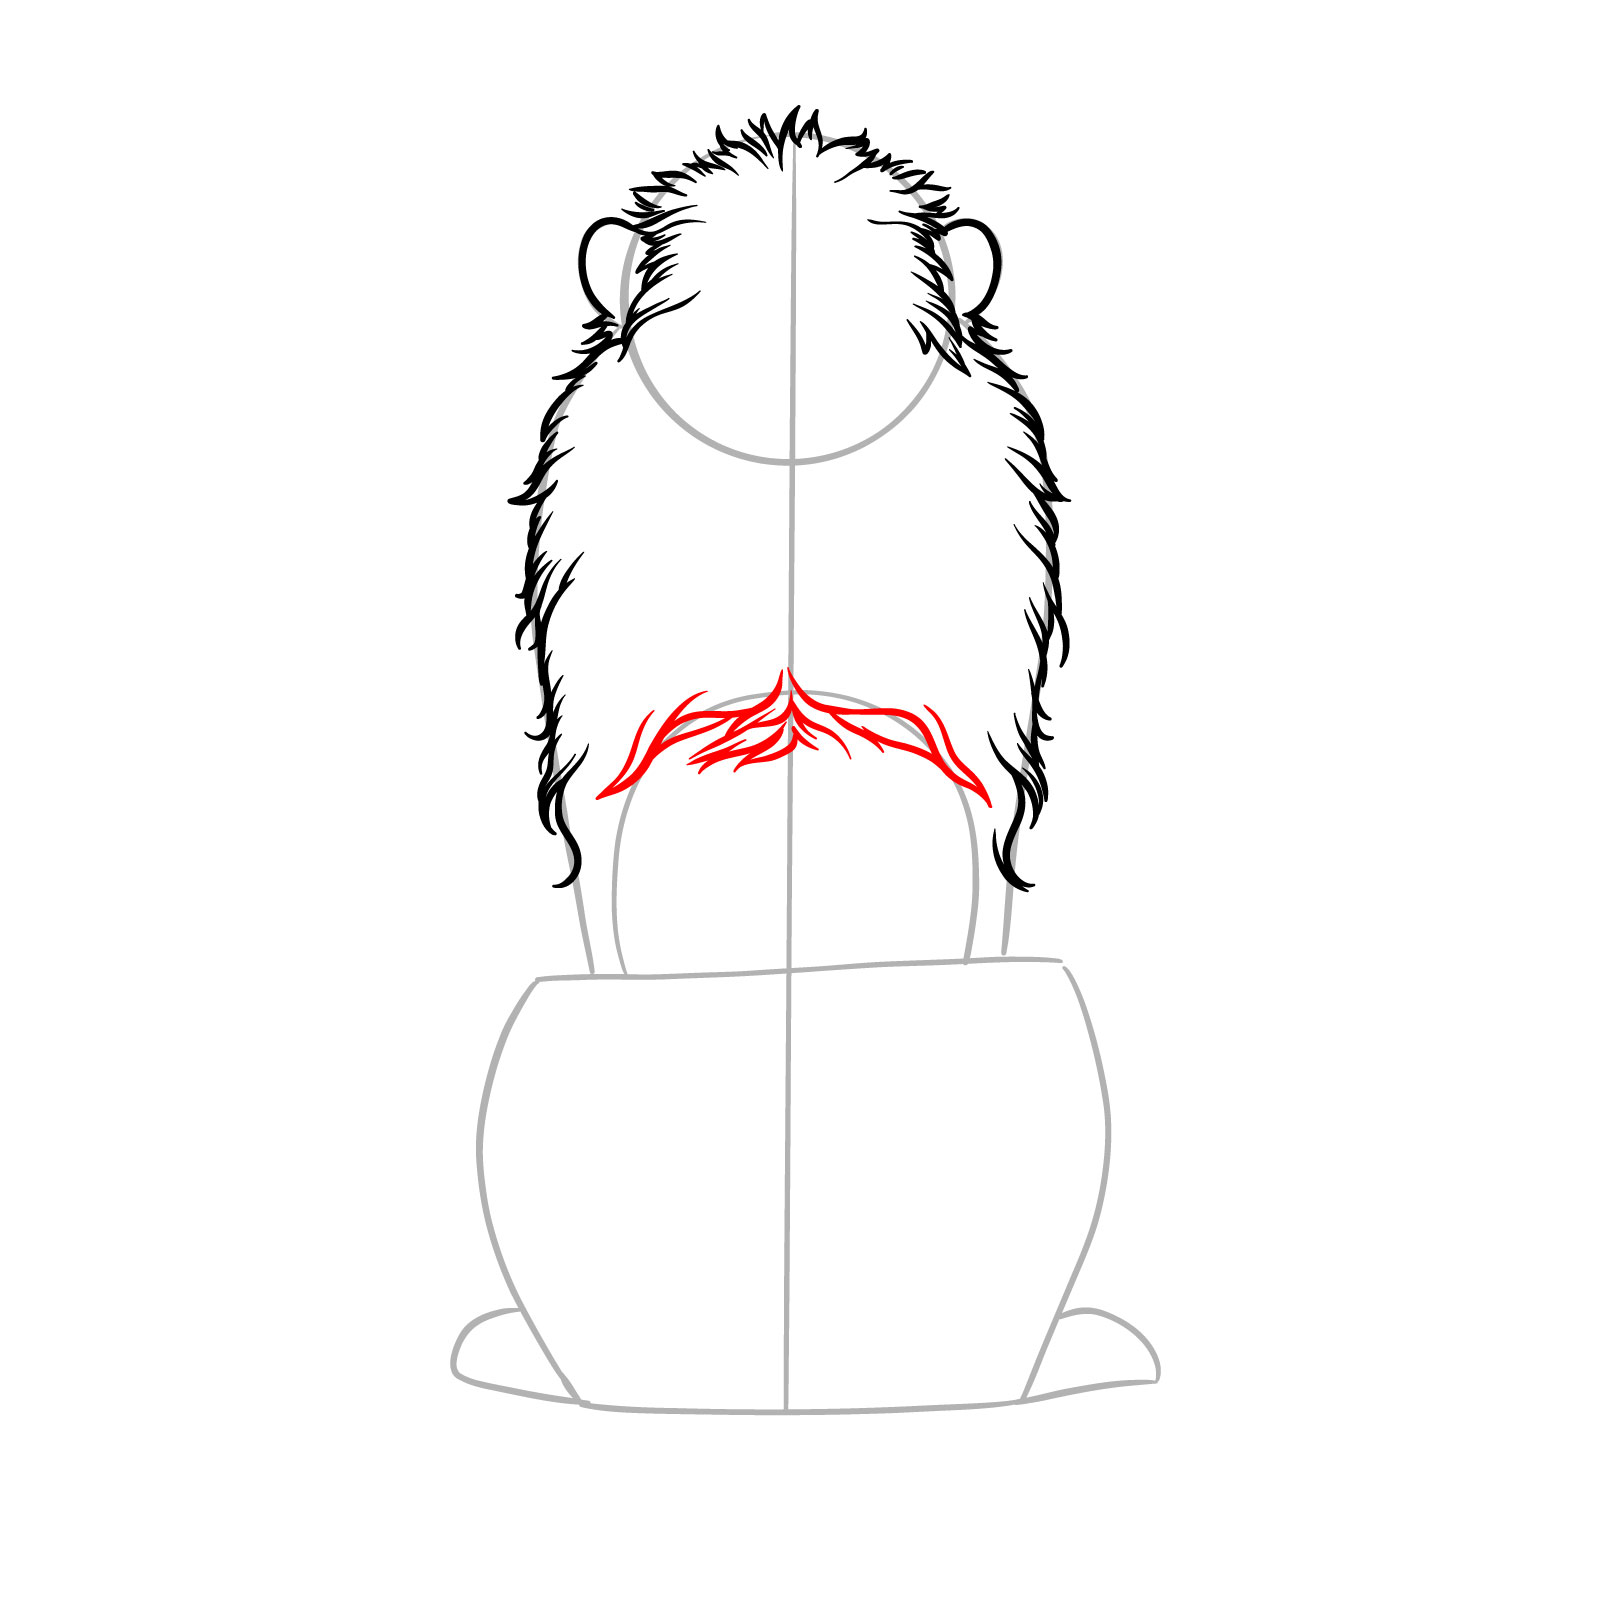 Step 6 in sketching a sitting lion from the back view, adding mane fur on the back